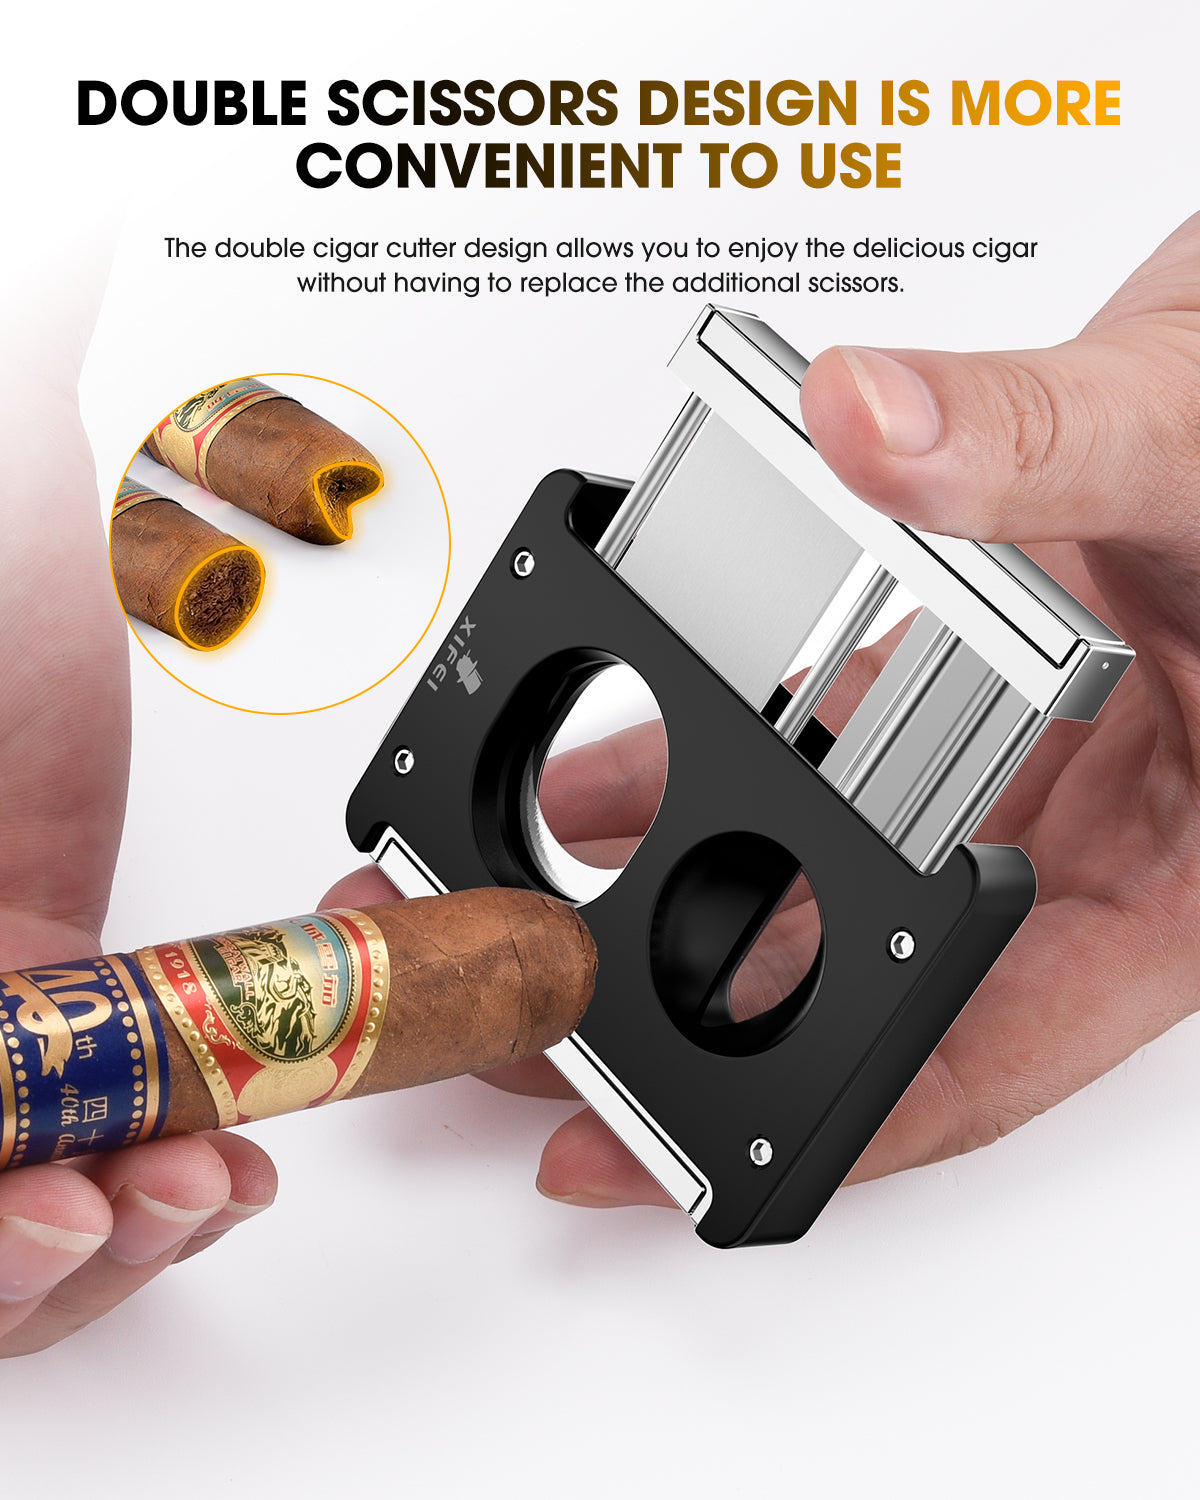  XIFEI Cigar Cutter V-Cut Guillotine,4 in 1 Straight Cut V  Cutter with Cigar Punch Cigar Holder Stainless Steel Blade Ergonomic Design  with Secure-Lock 60 RG Cigar Accessories (Black) : Health 